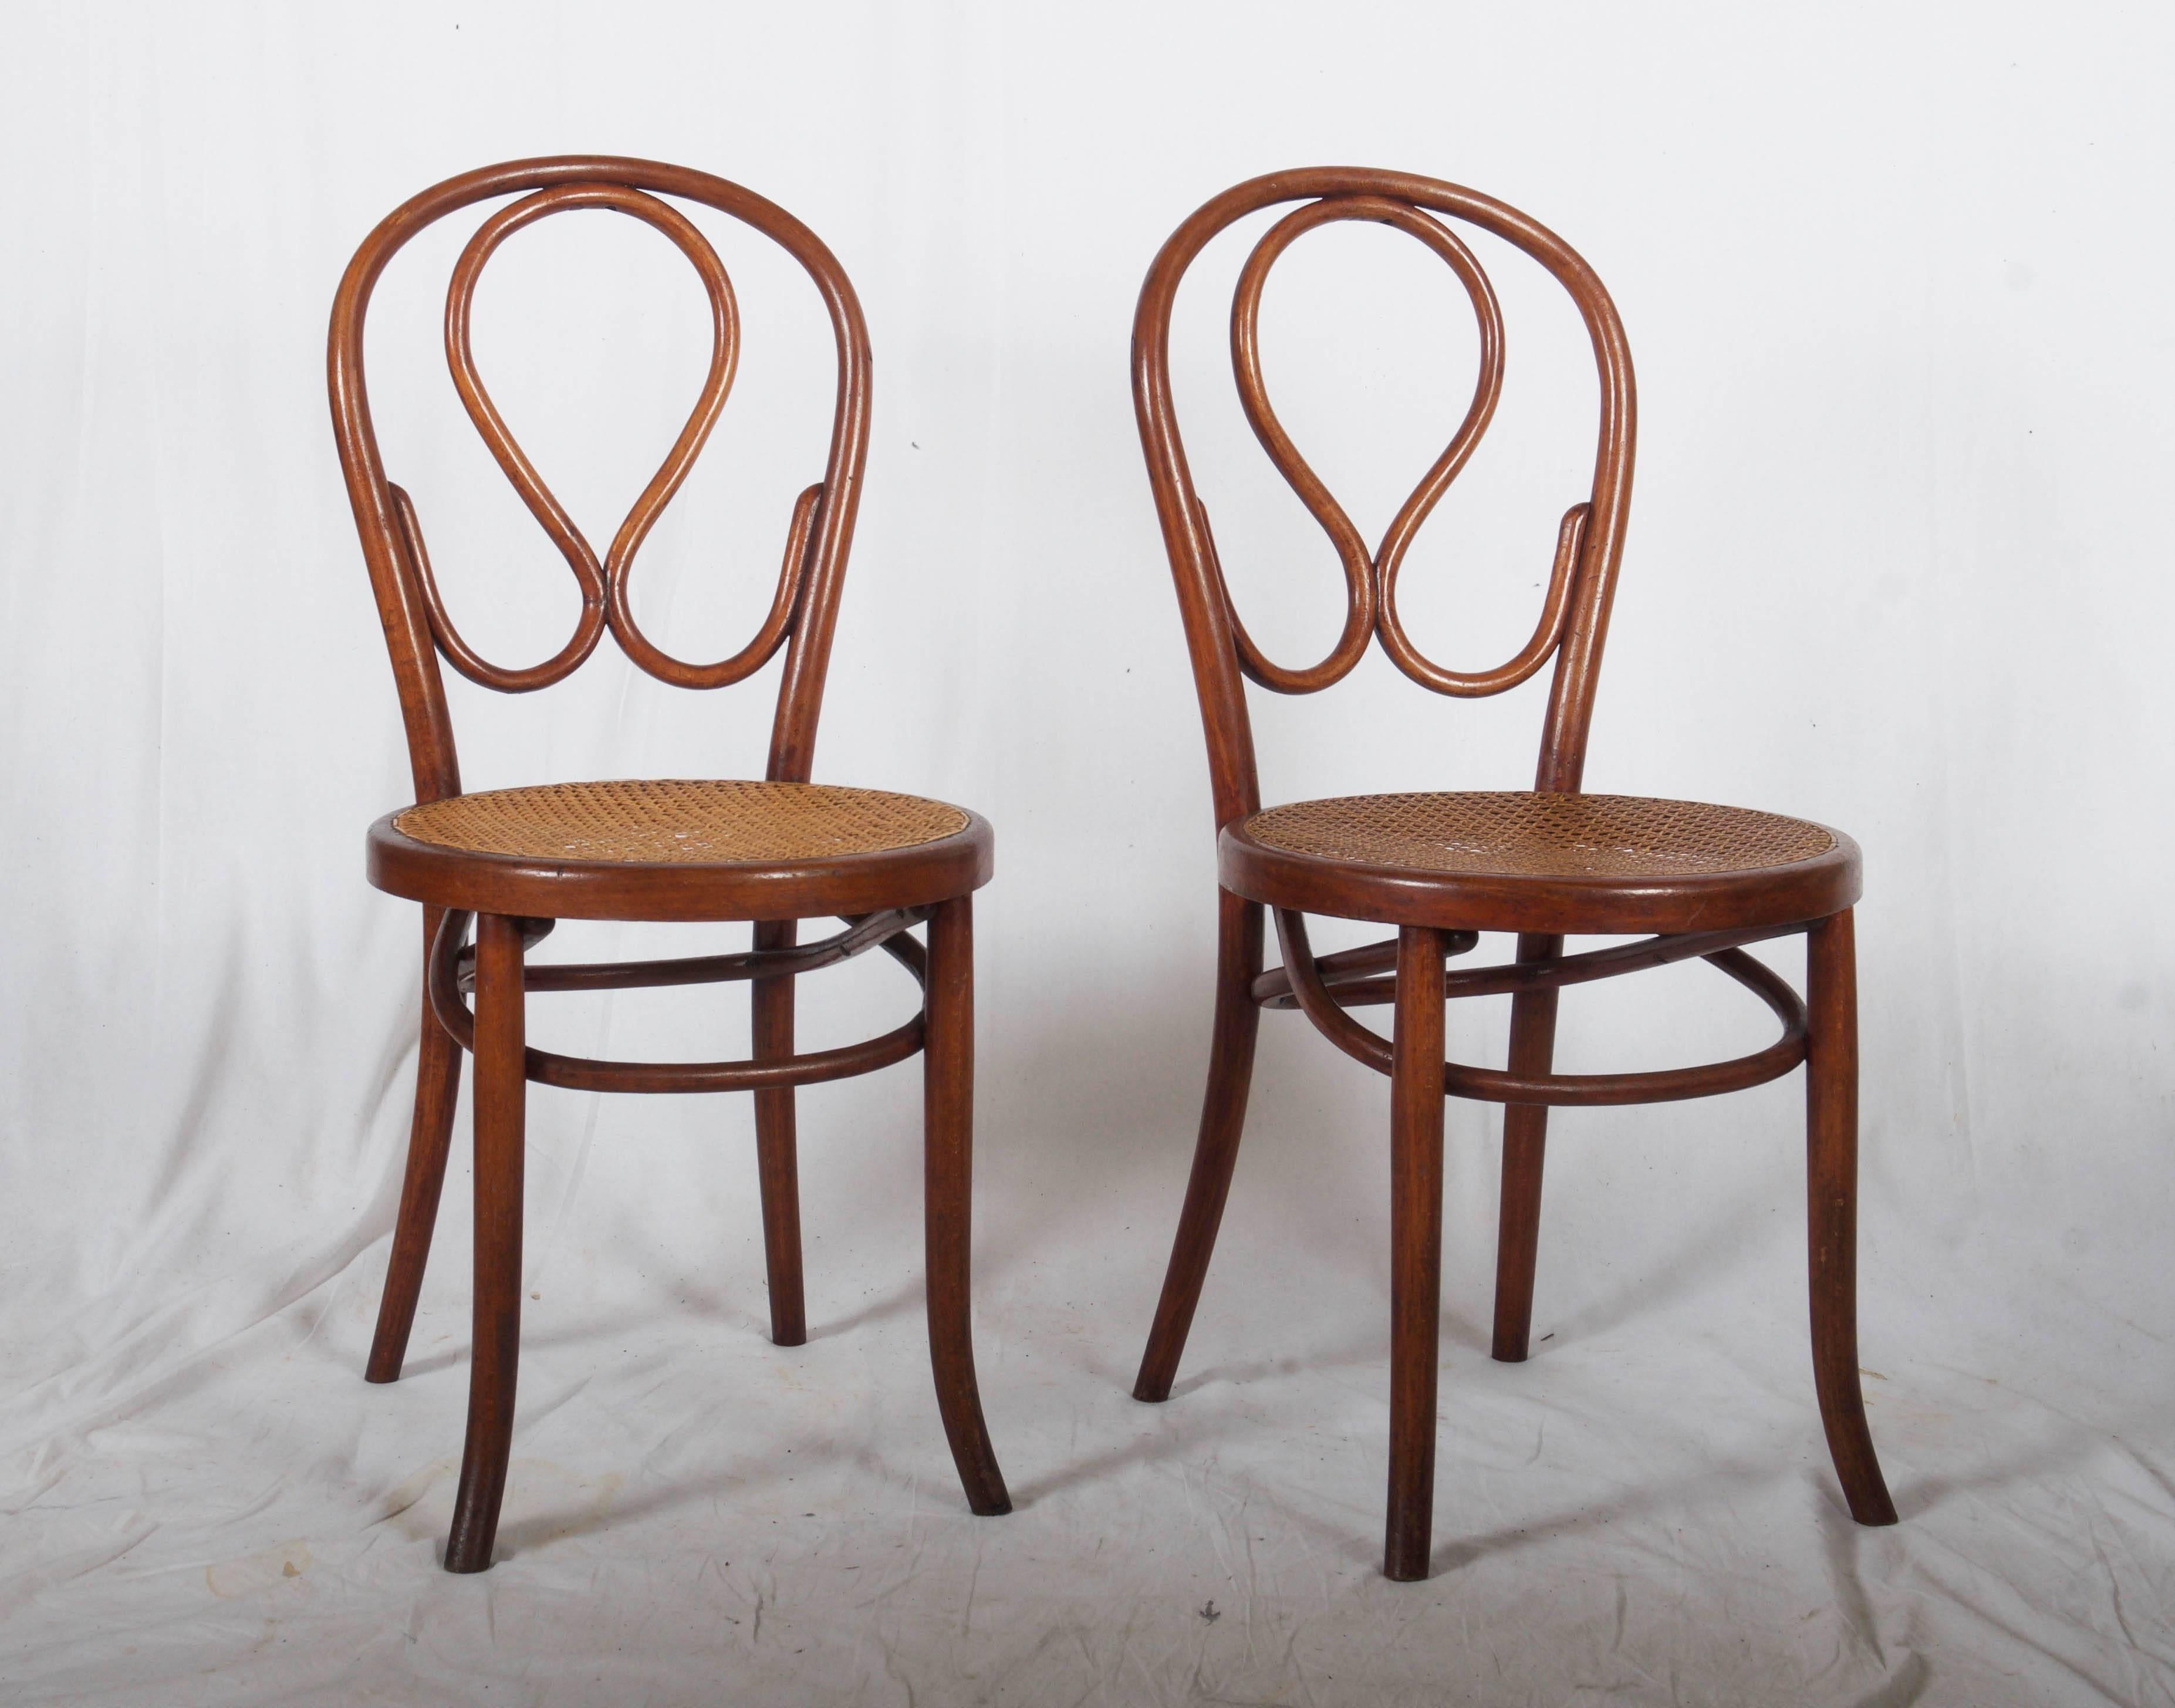 Bentwood chairs as Thonet No 20. New canning on all chairs.
Four pieces available
Delivery time 3-4 weeks.
 